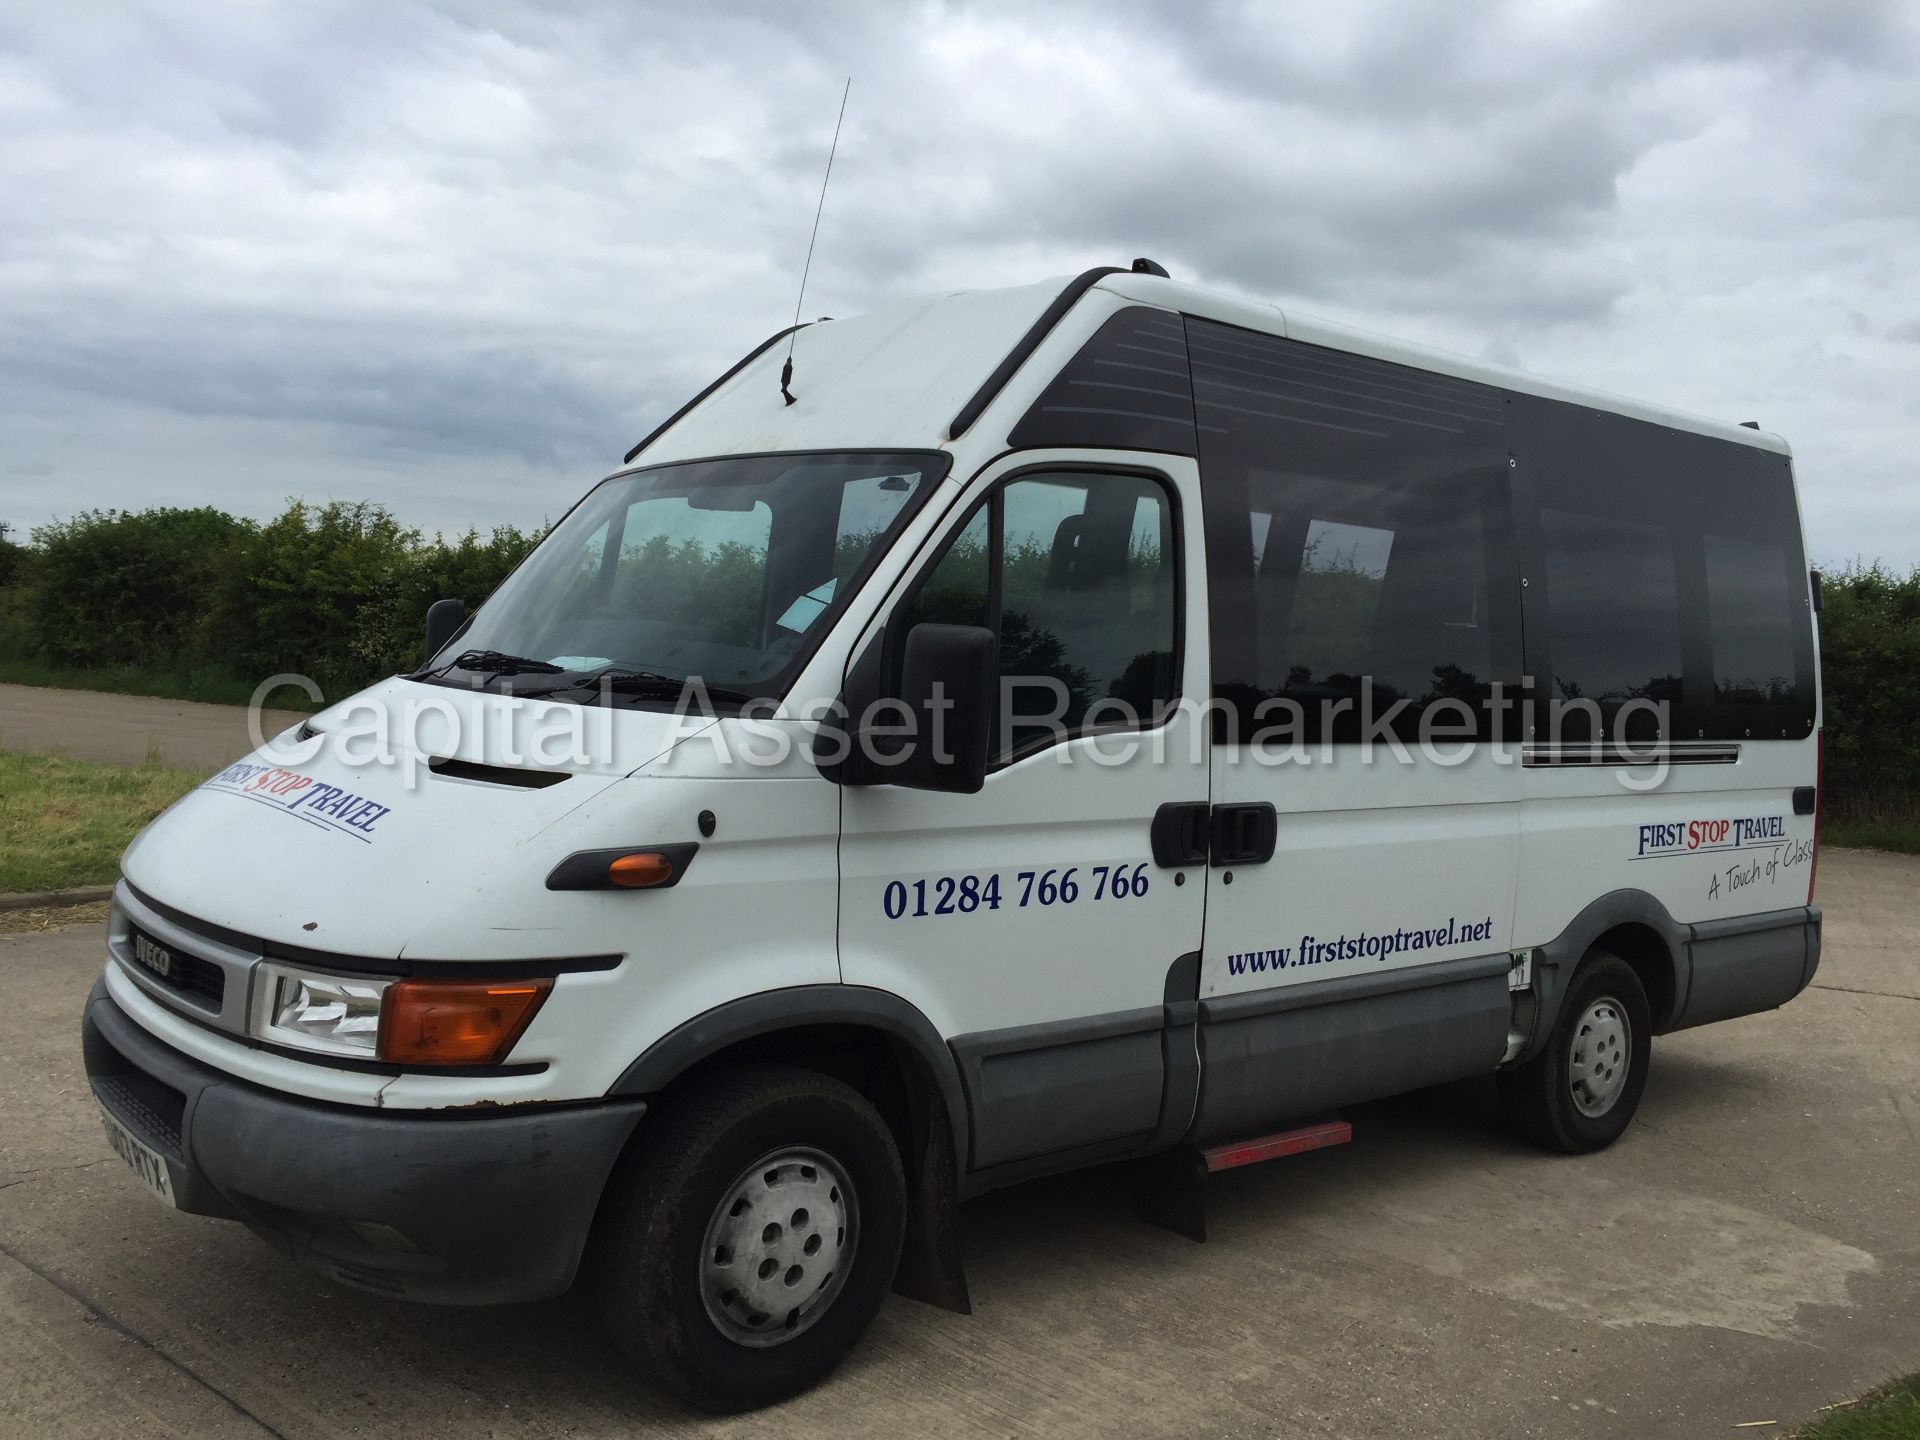 (on sale) IVECO DAILY 35S13 '14 SEATER MINI-BUS' (2003 - 03 REG) '2.3 DIESEL - 6 SPEED' (NO VAT) - Image 4 of 23